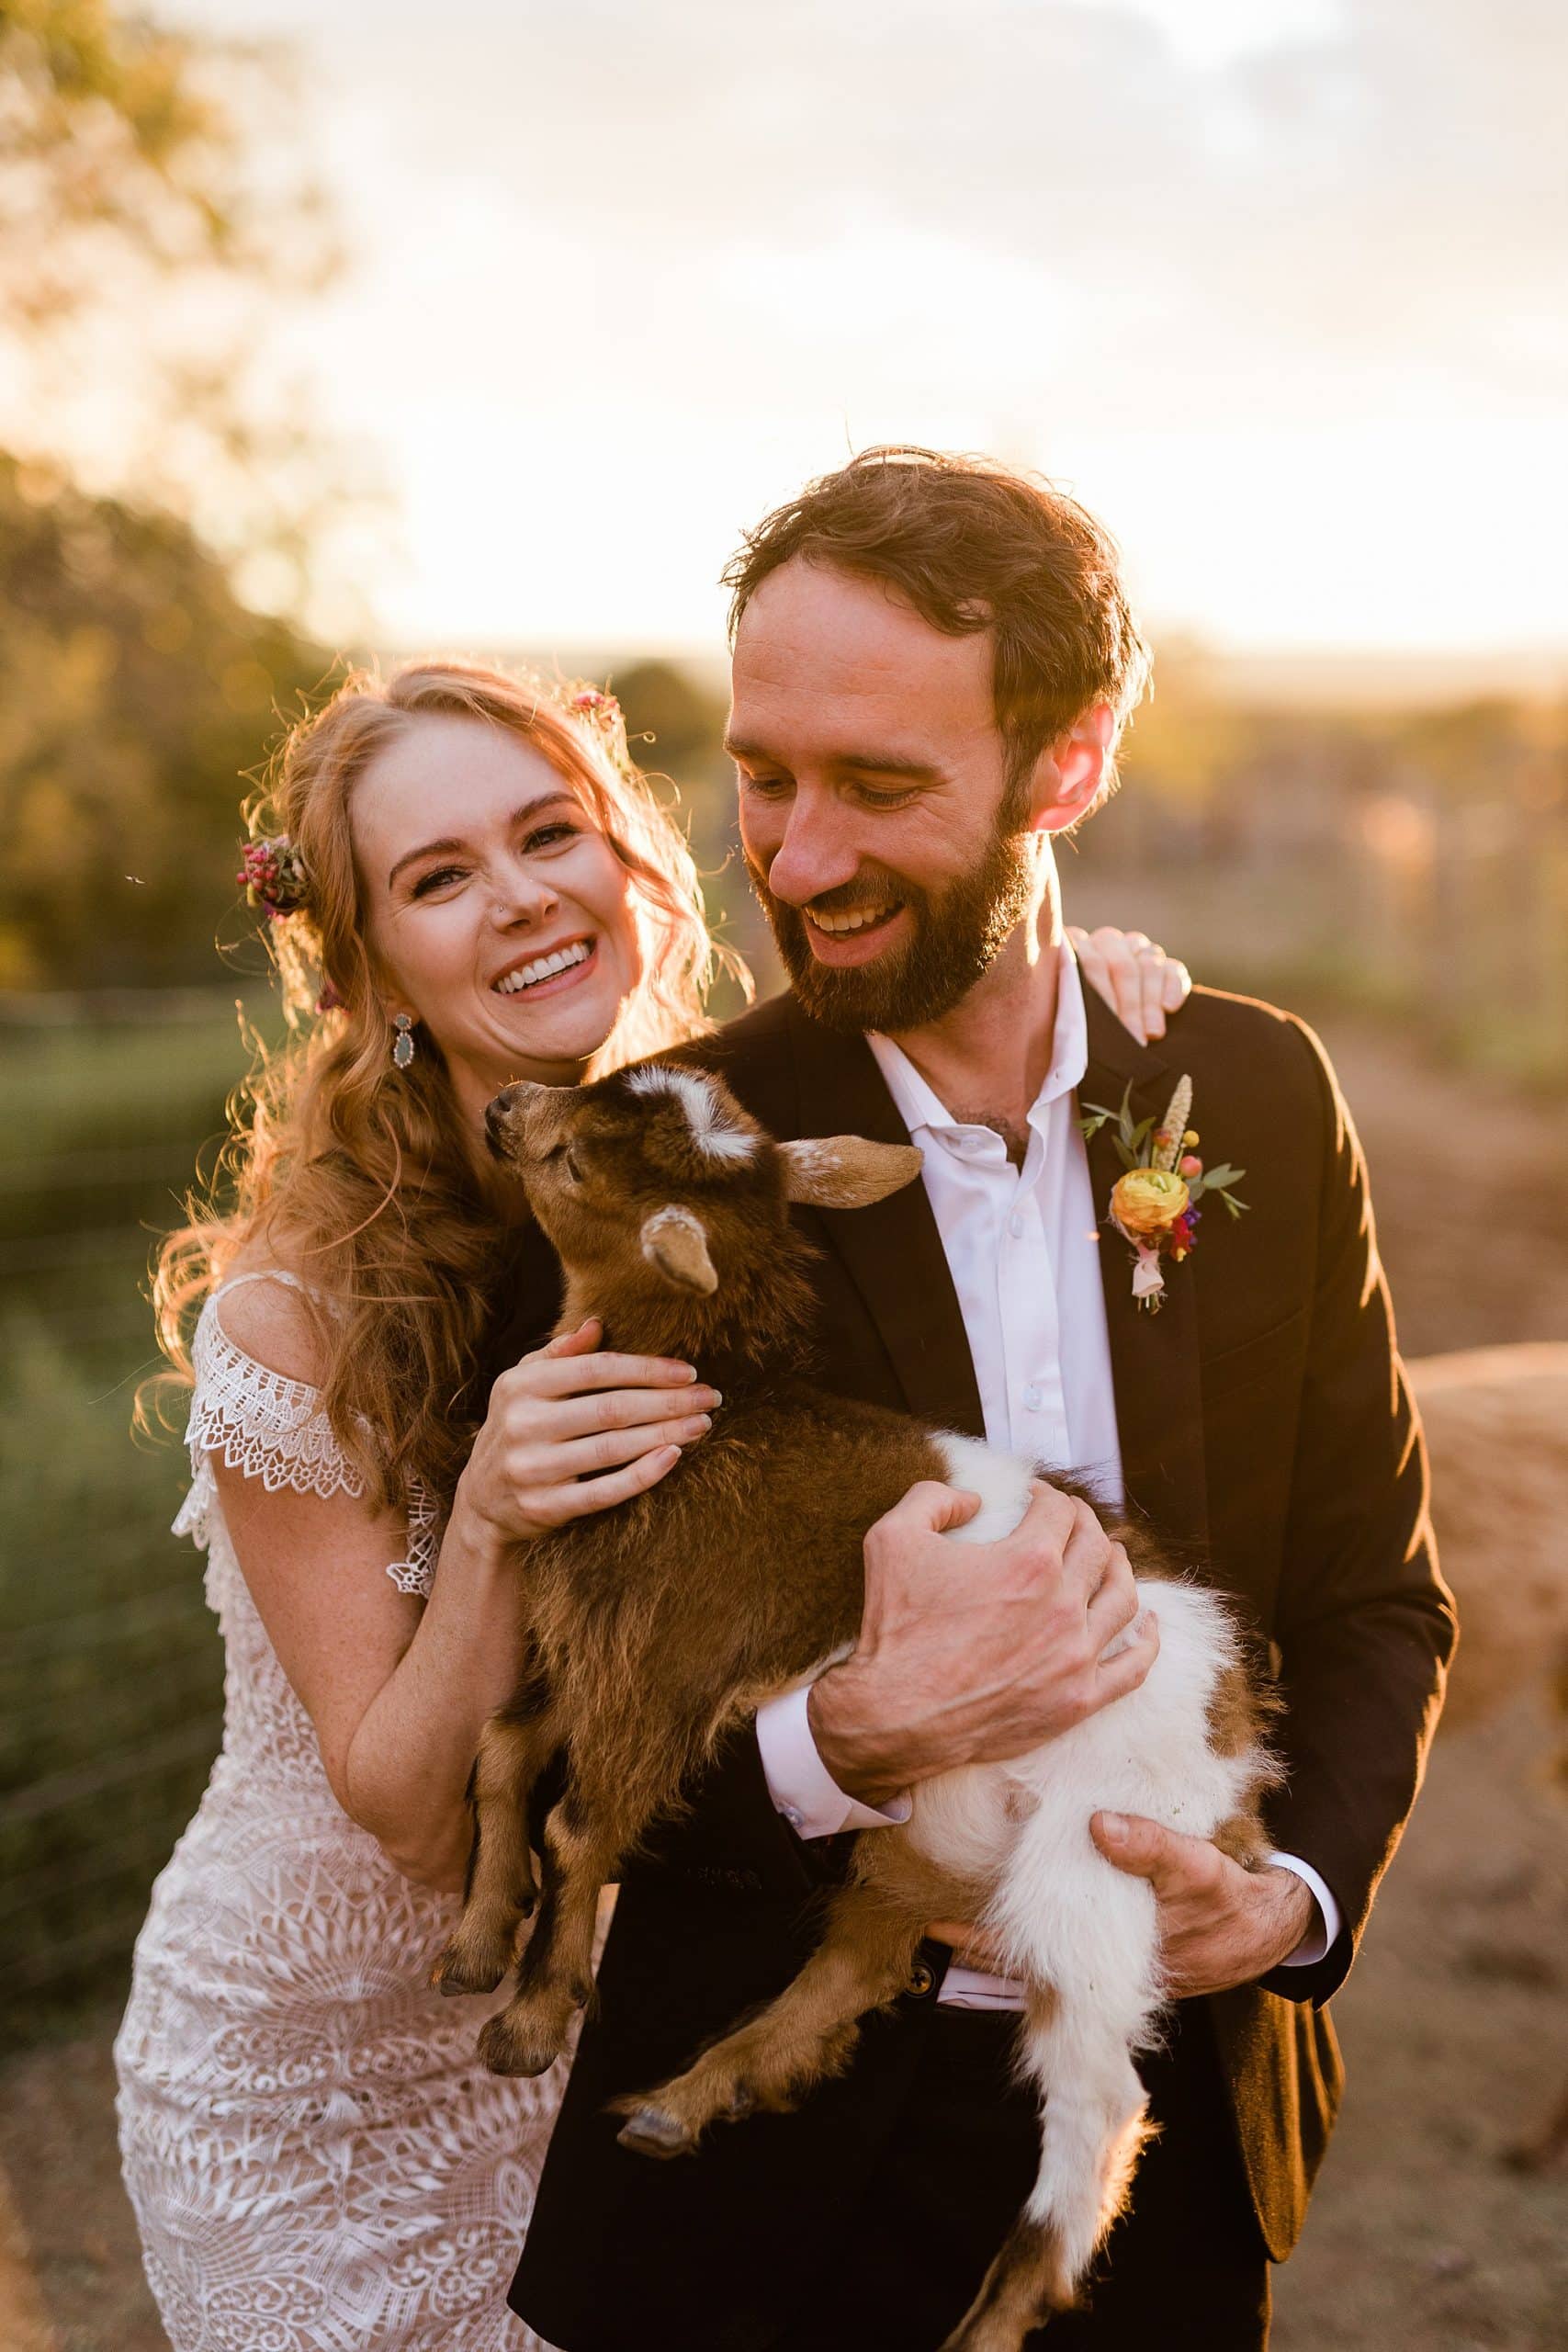 A couple smiles and laughs while holding a goat after their intimate wedding at a goji berry farm in Taos